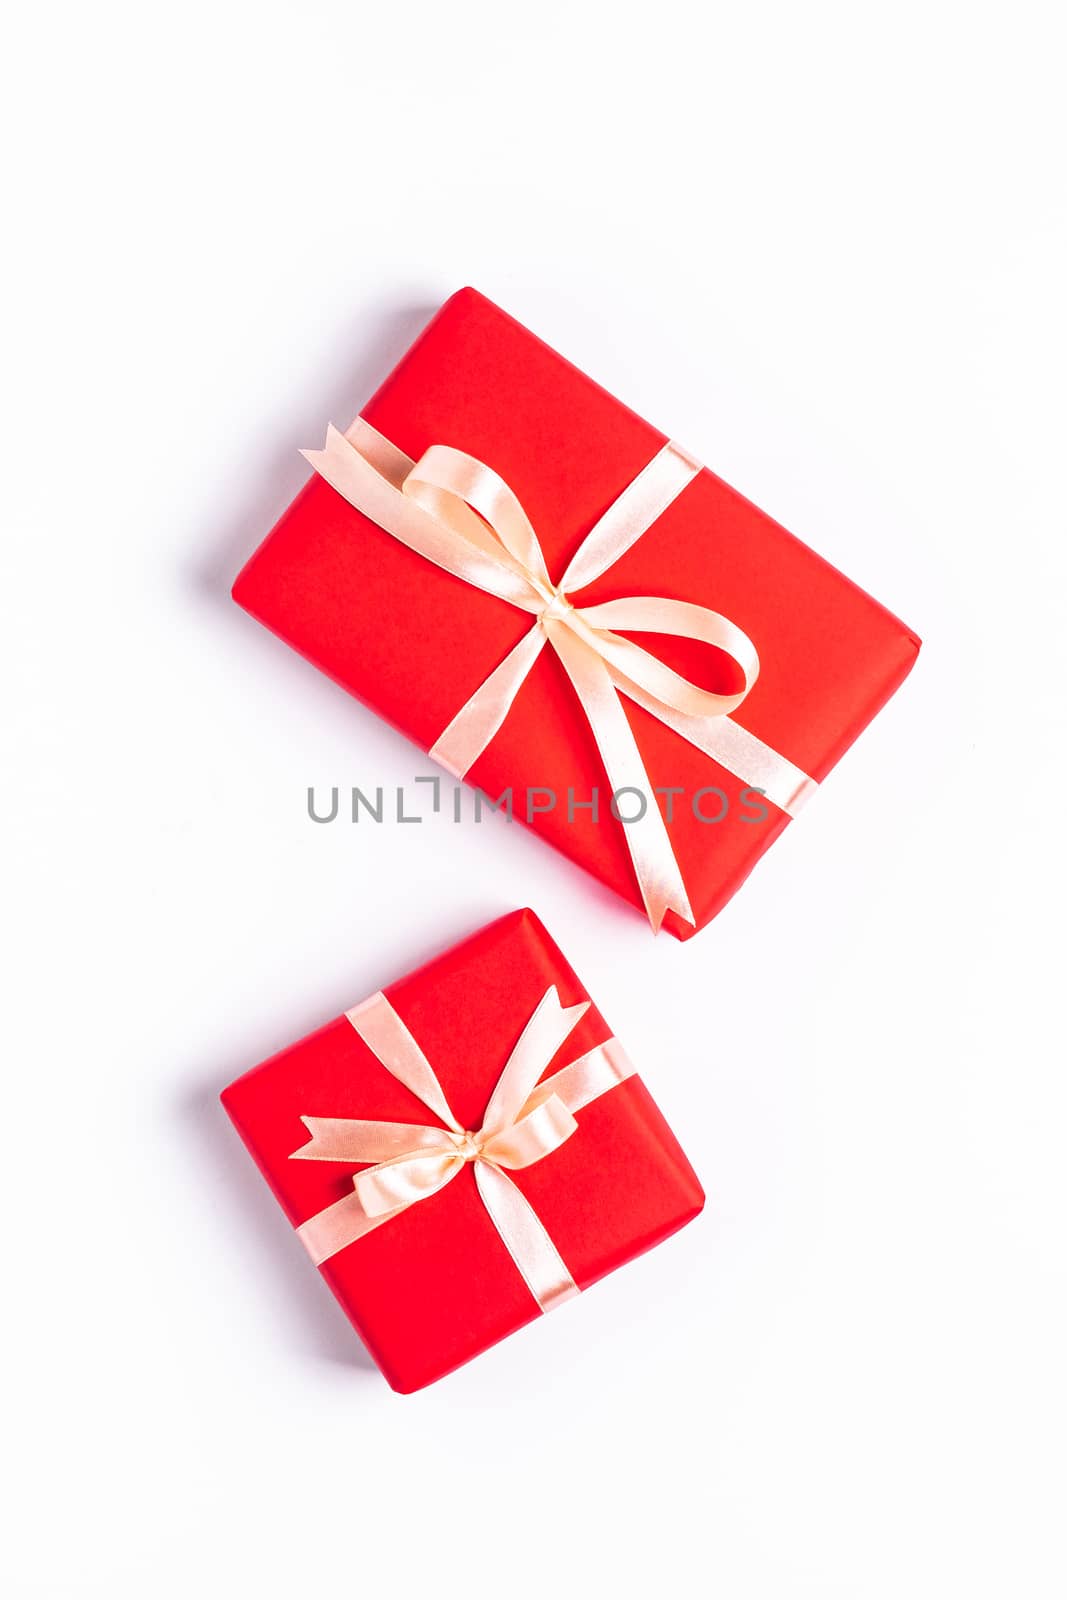 Christmas composition. Two red gift boxex, Winter holidays concept. Top view isolated